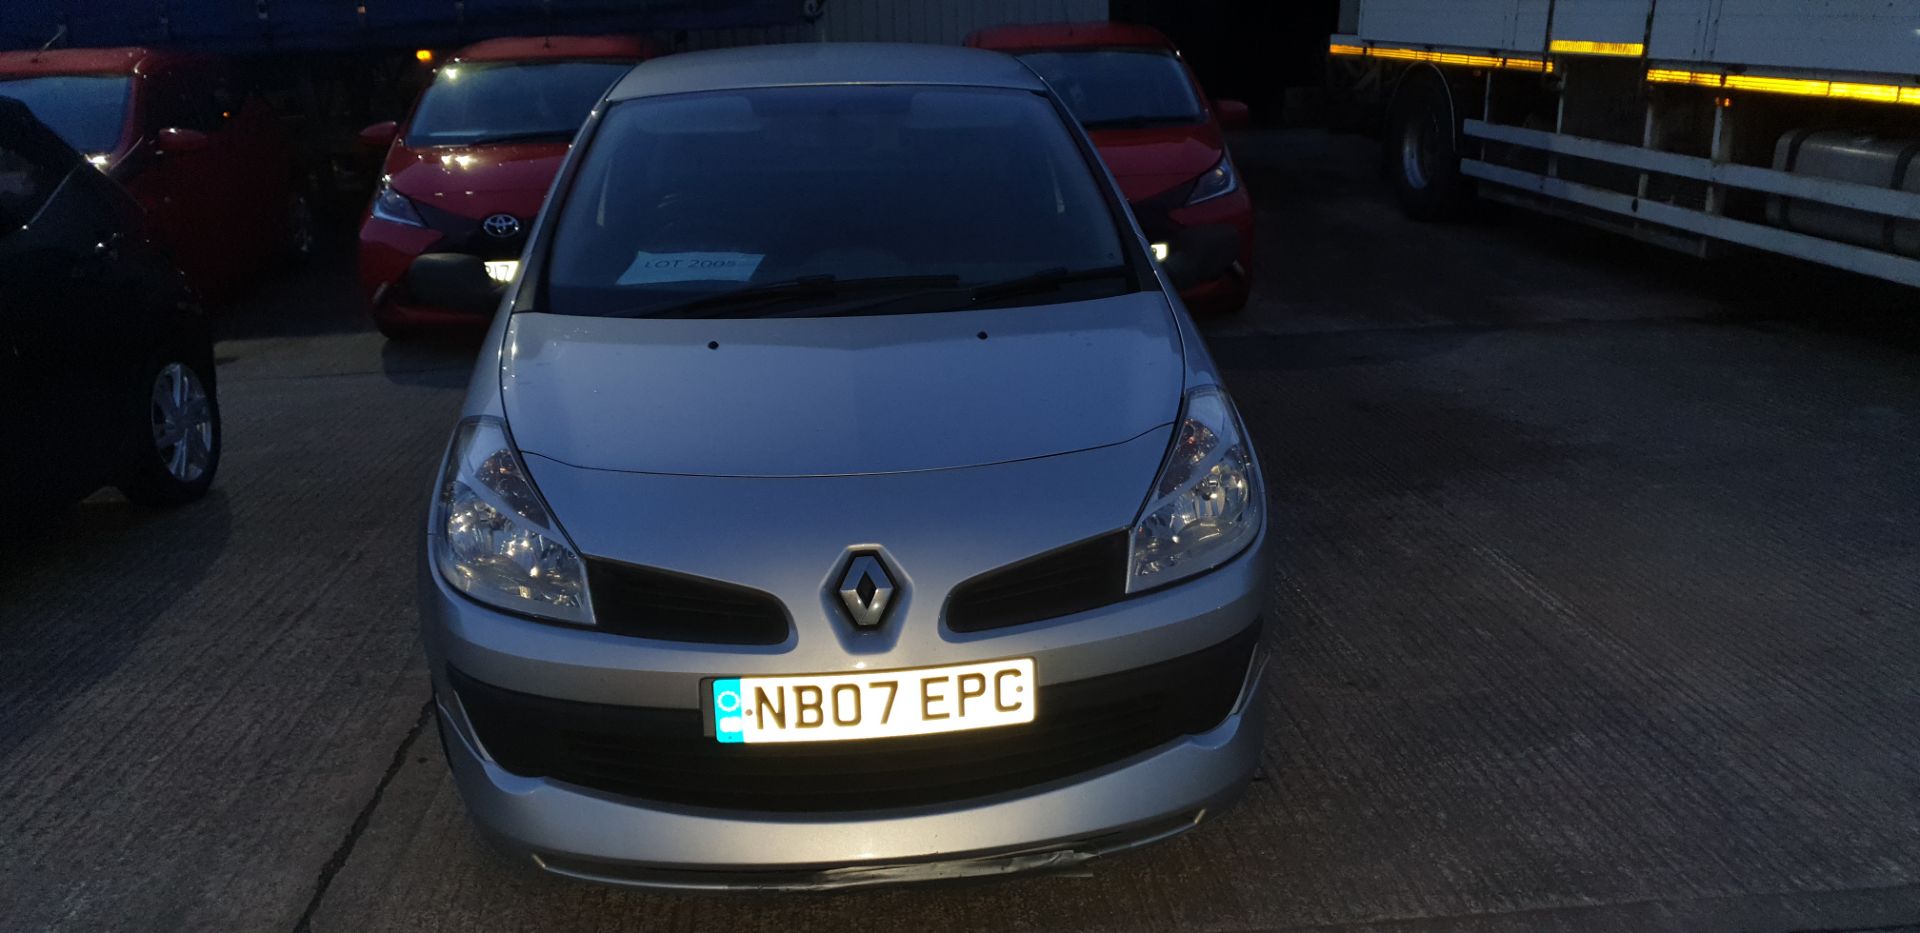 SILVER RENAULT CLIO EXTREME. Reg : NB07EPC, Mileage : 94,015 Details: KEY YES LOG BOOK YES MOT UNTIL - Image 2 of 3